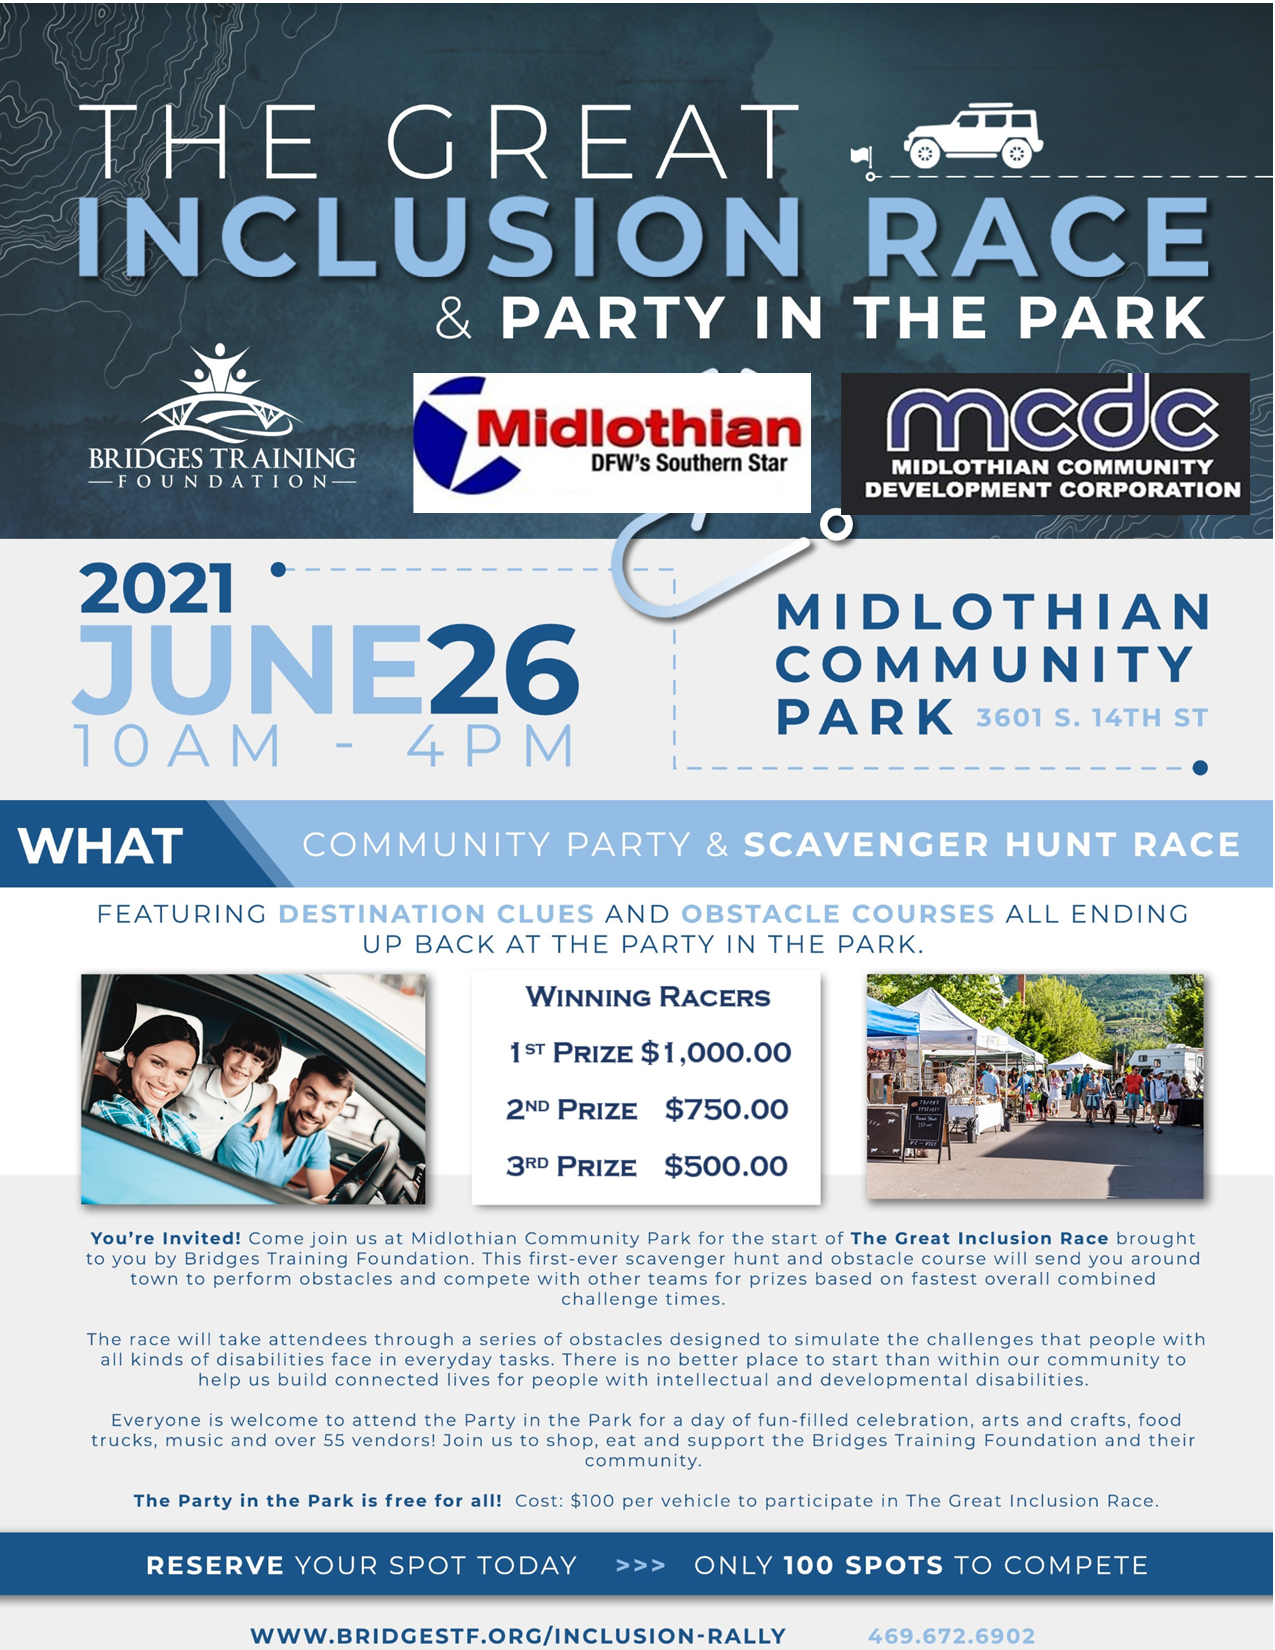 Presenting the Inaugural “Great Inclusion Race & Party in the Park”